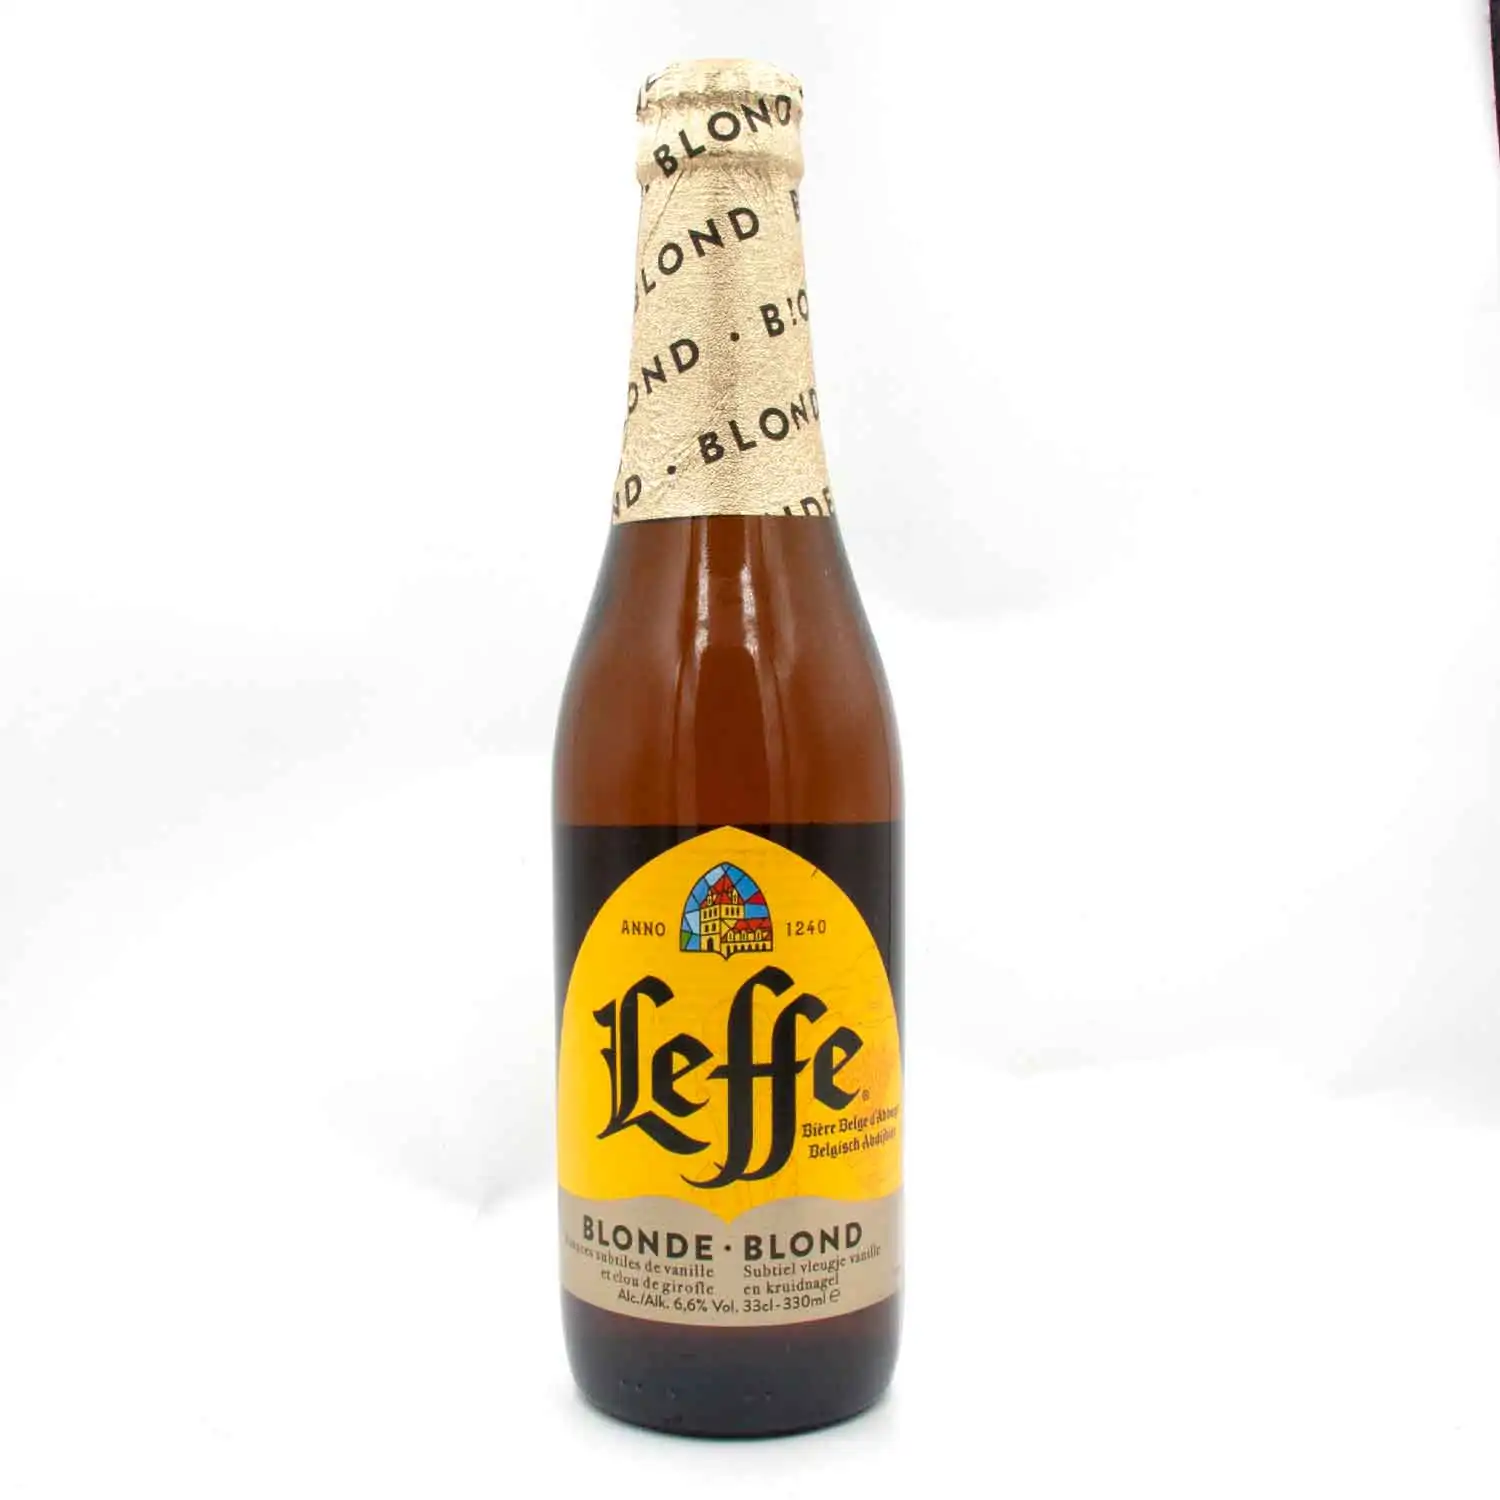 Leffe blond 33cl Alc 6,6% - Buy at Real Tobacco